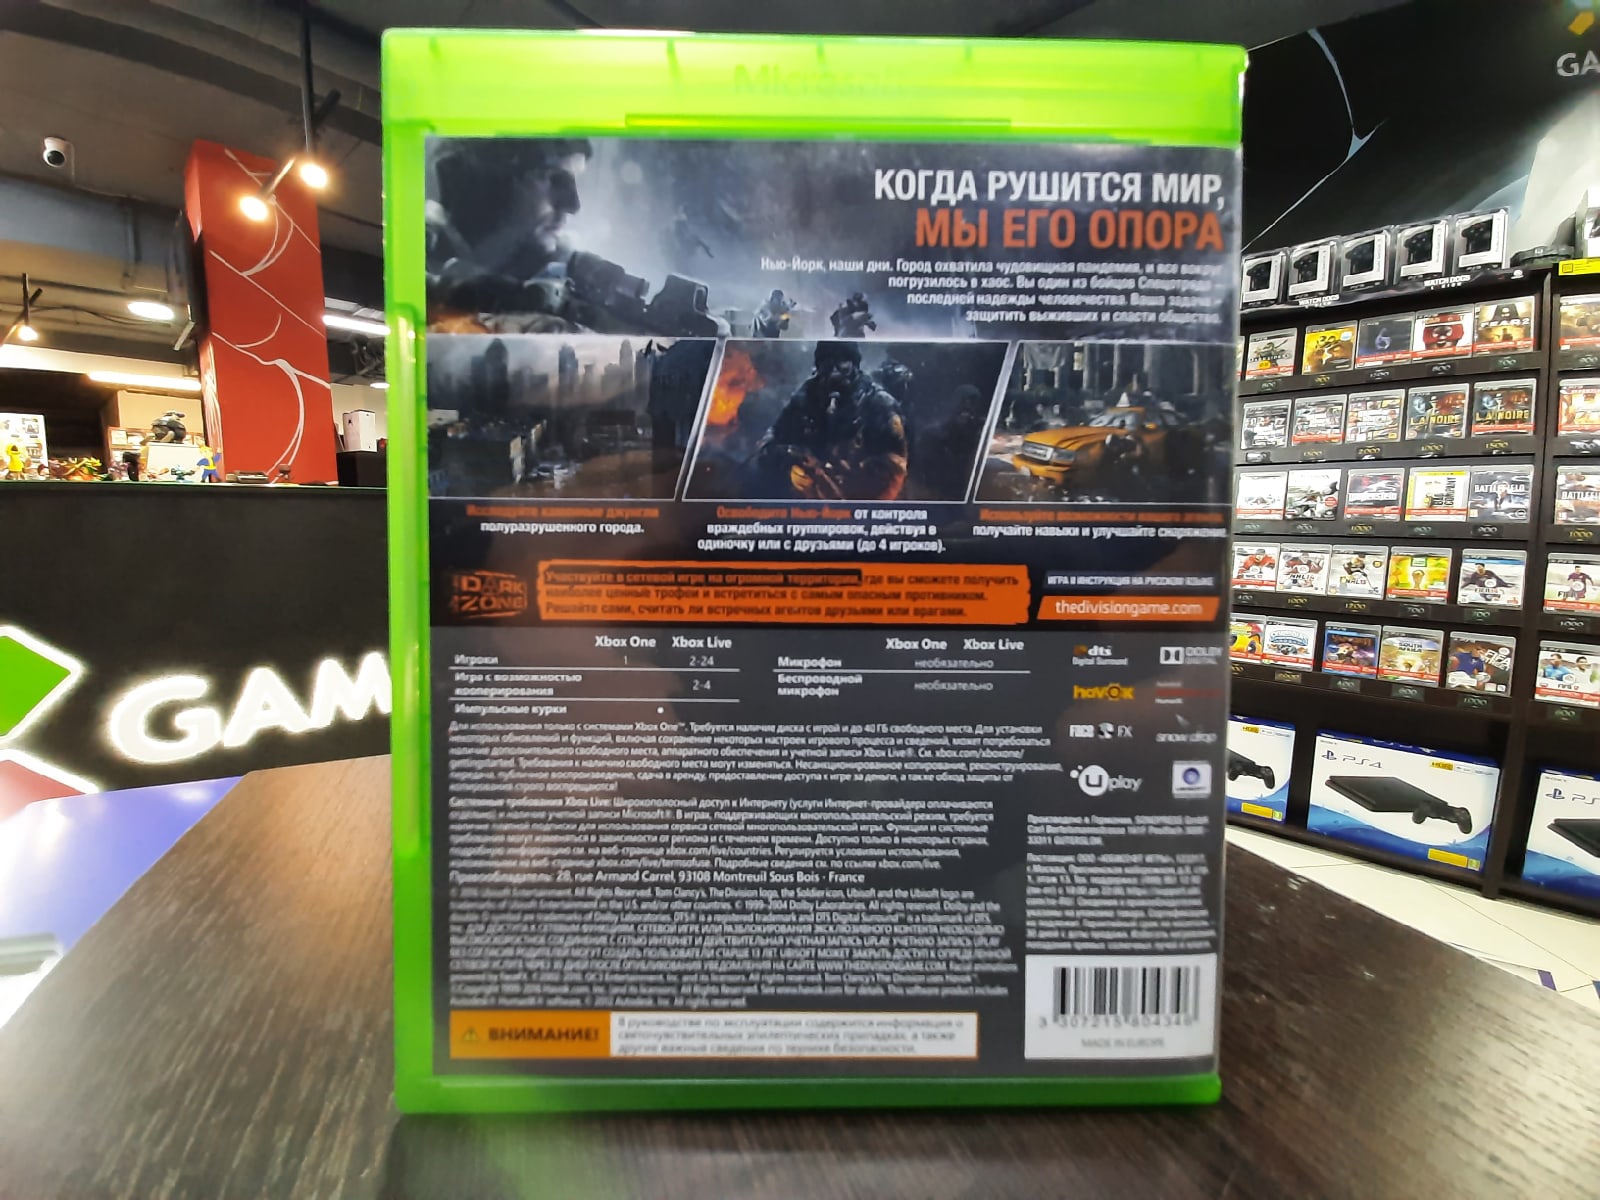 Tom Clancy's: The Division Xbox One